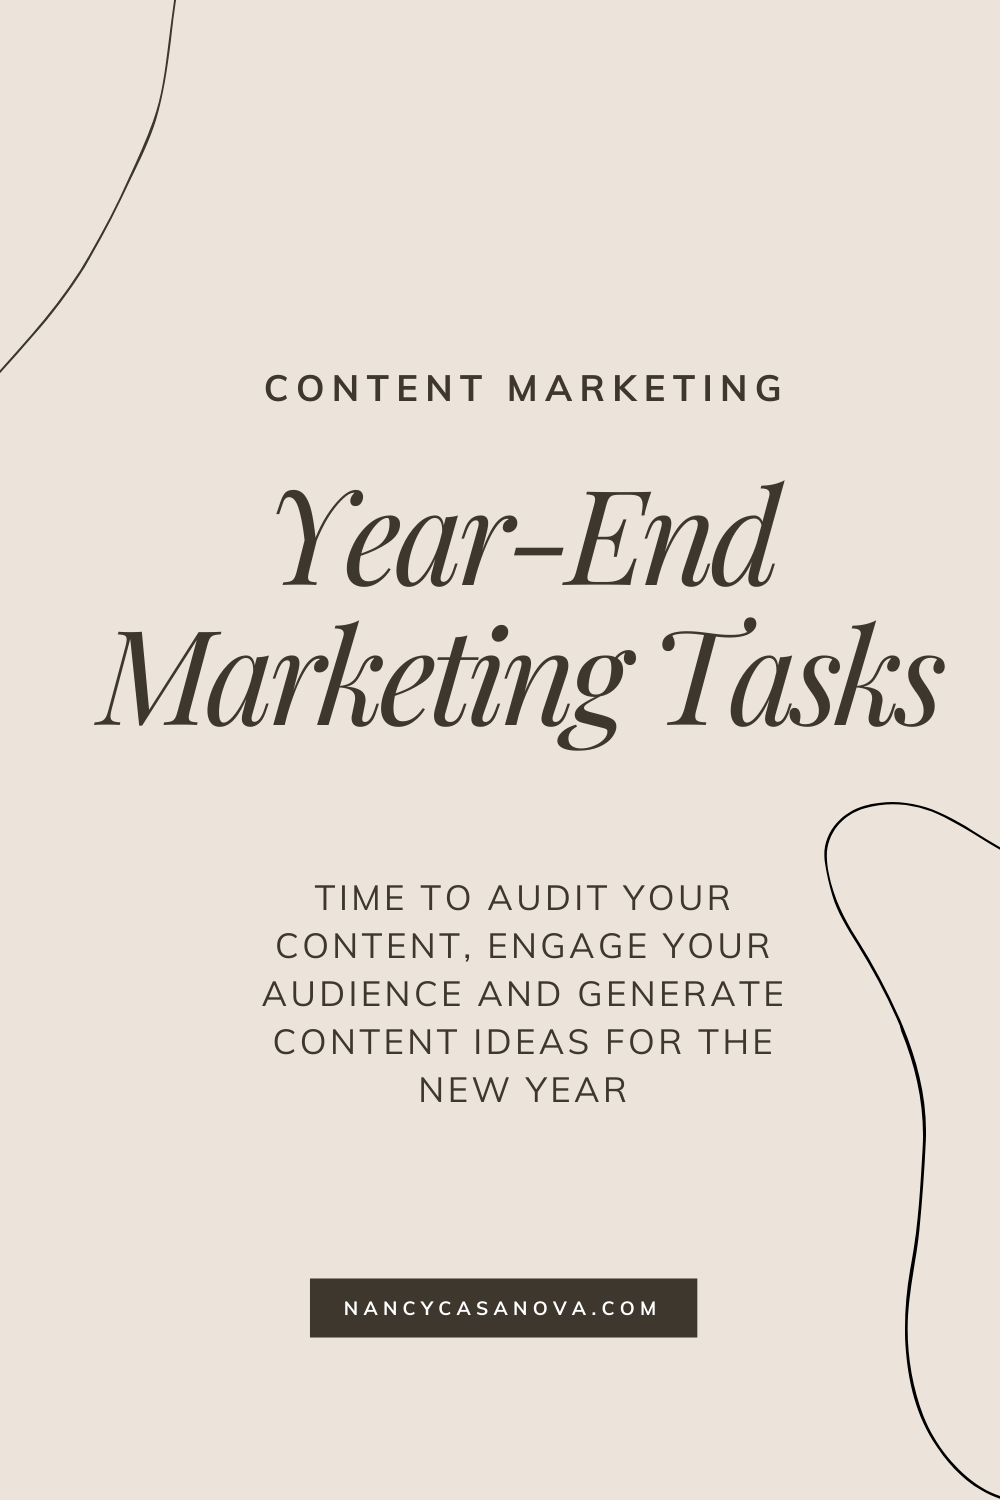 Time to audit your content, engage your audience and generate content ideas for the new year.